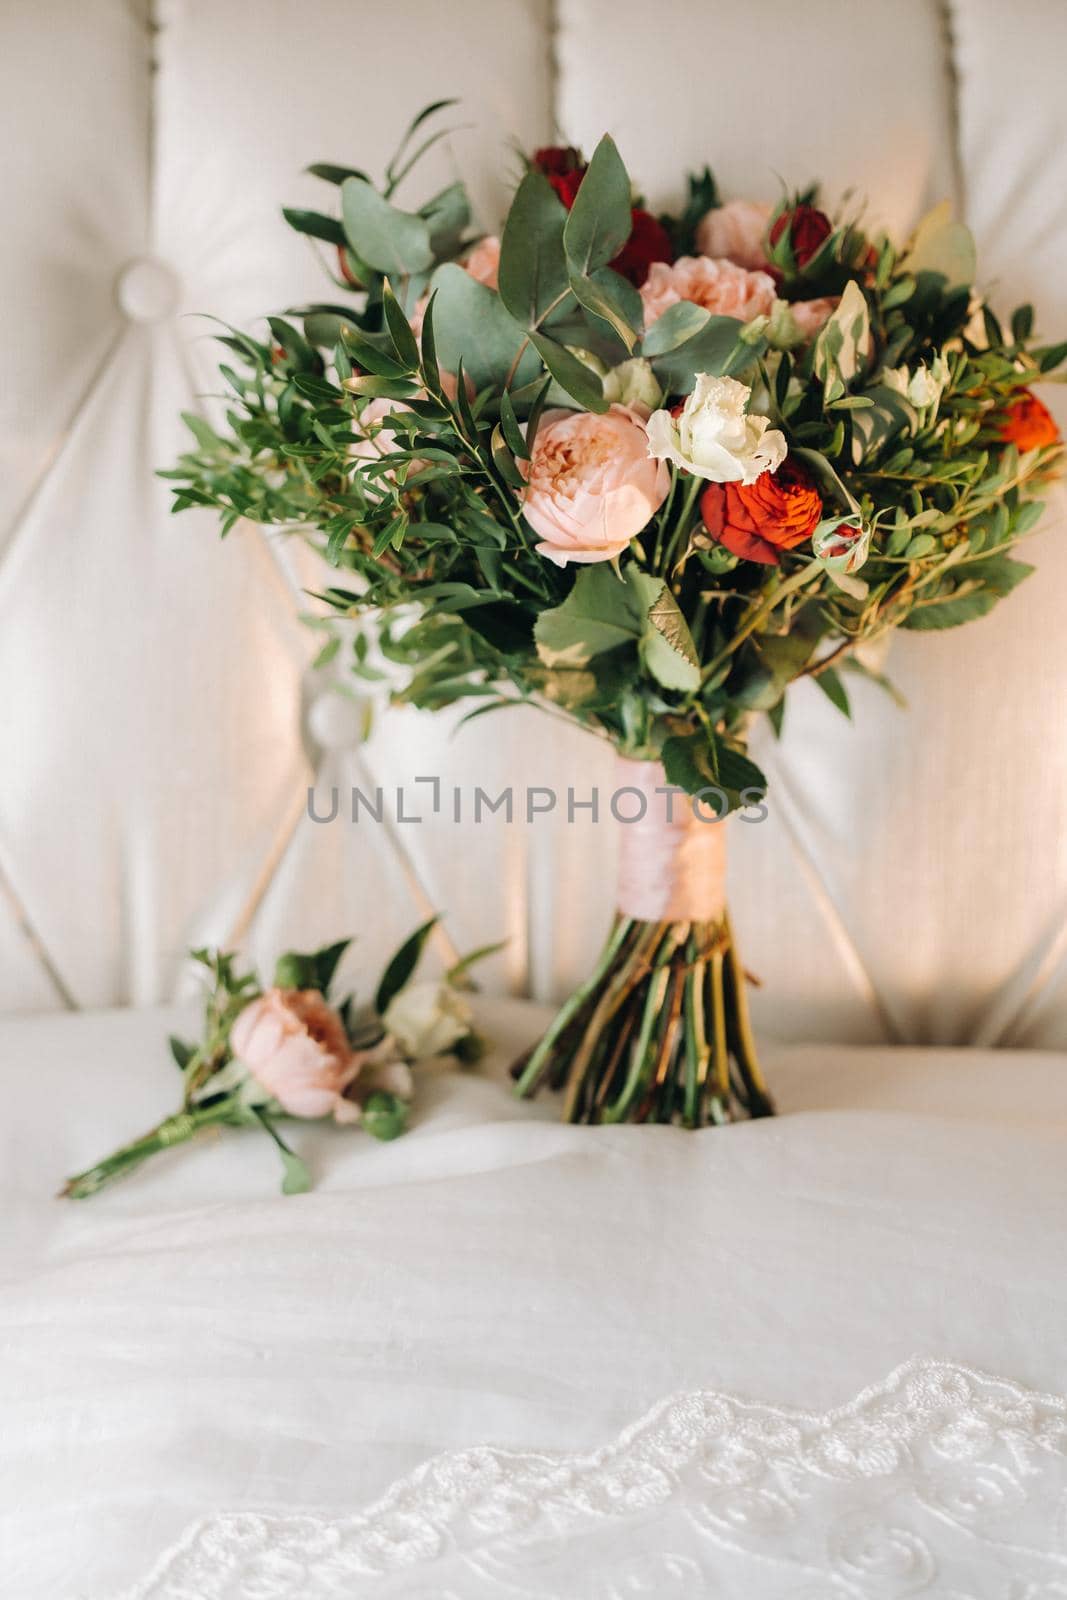 wedding bouquet with roses and boutonniere.The decor at the wedding by Lobachad